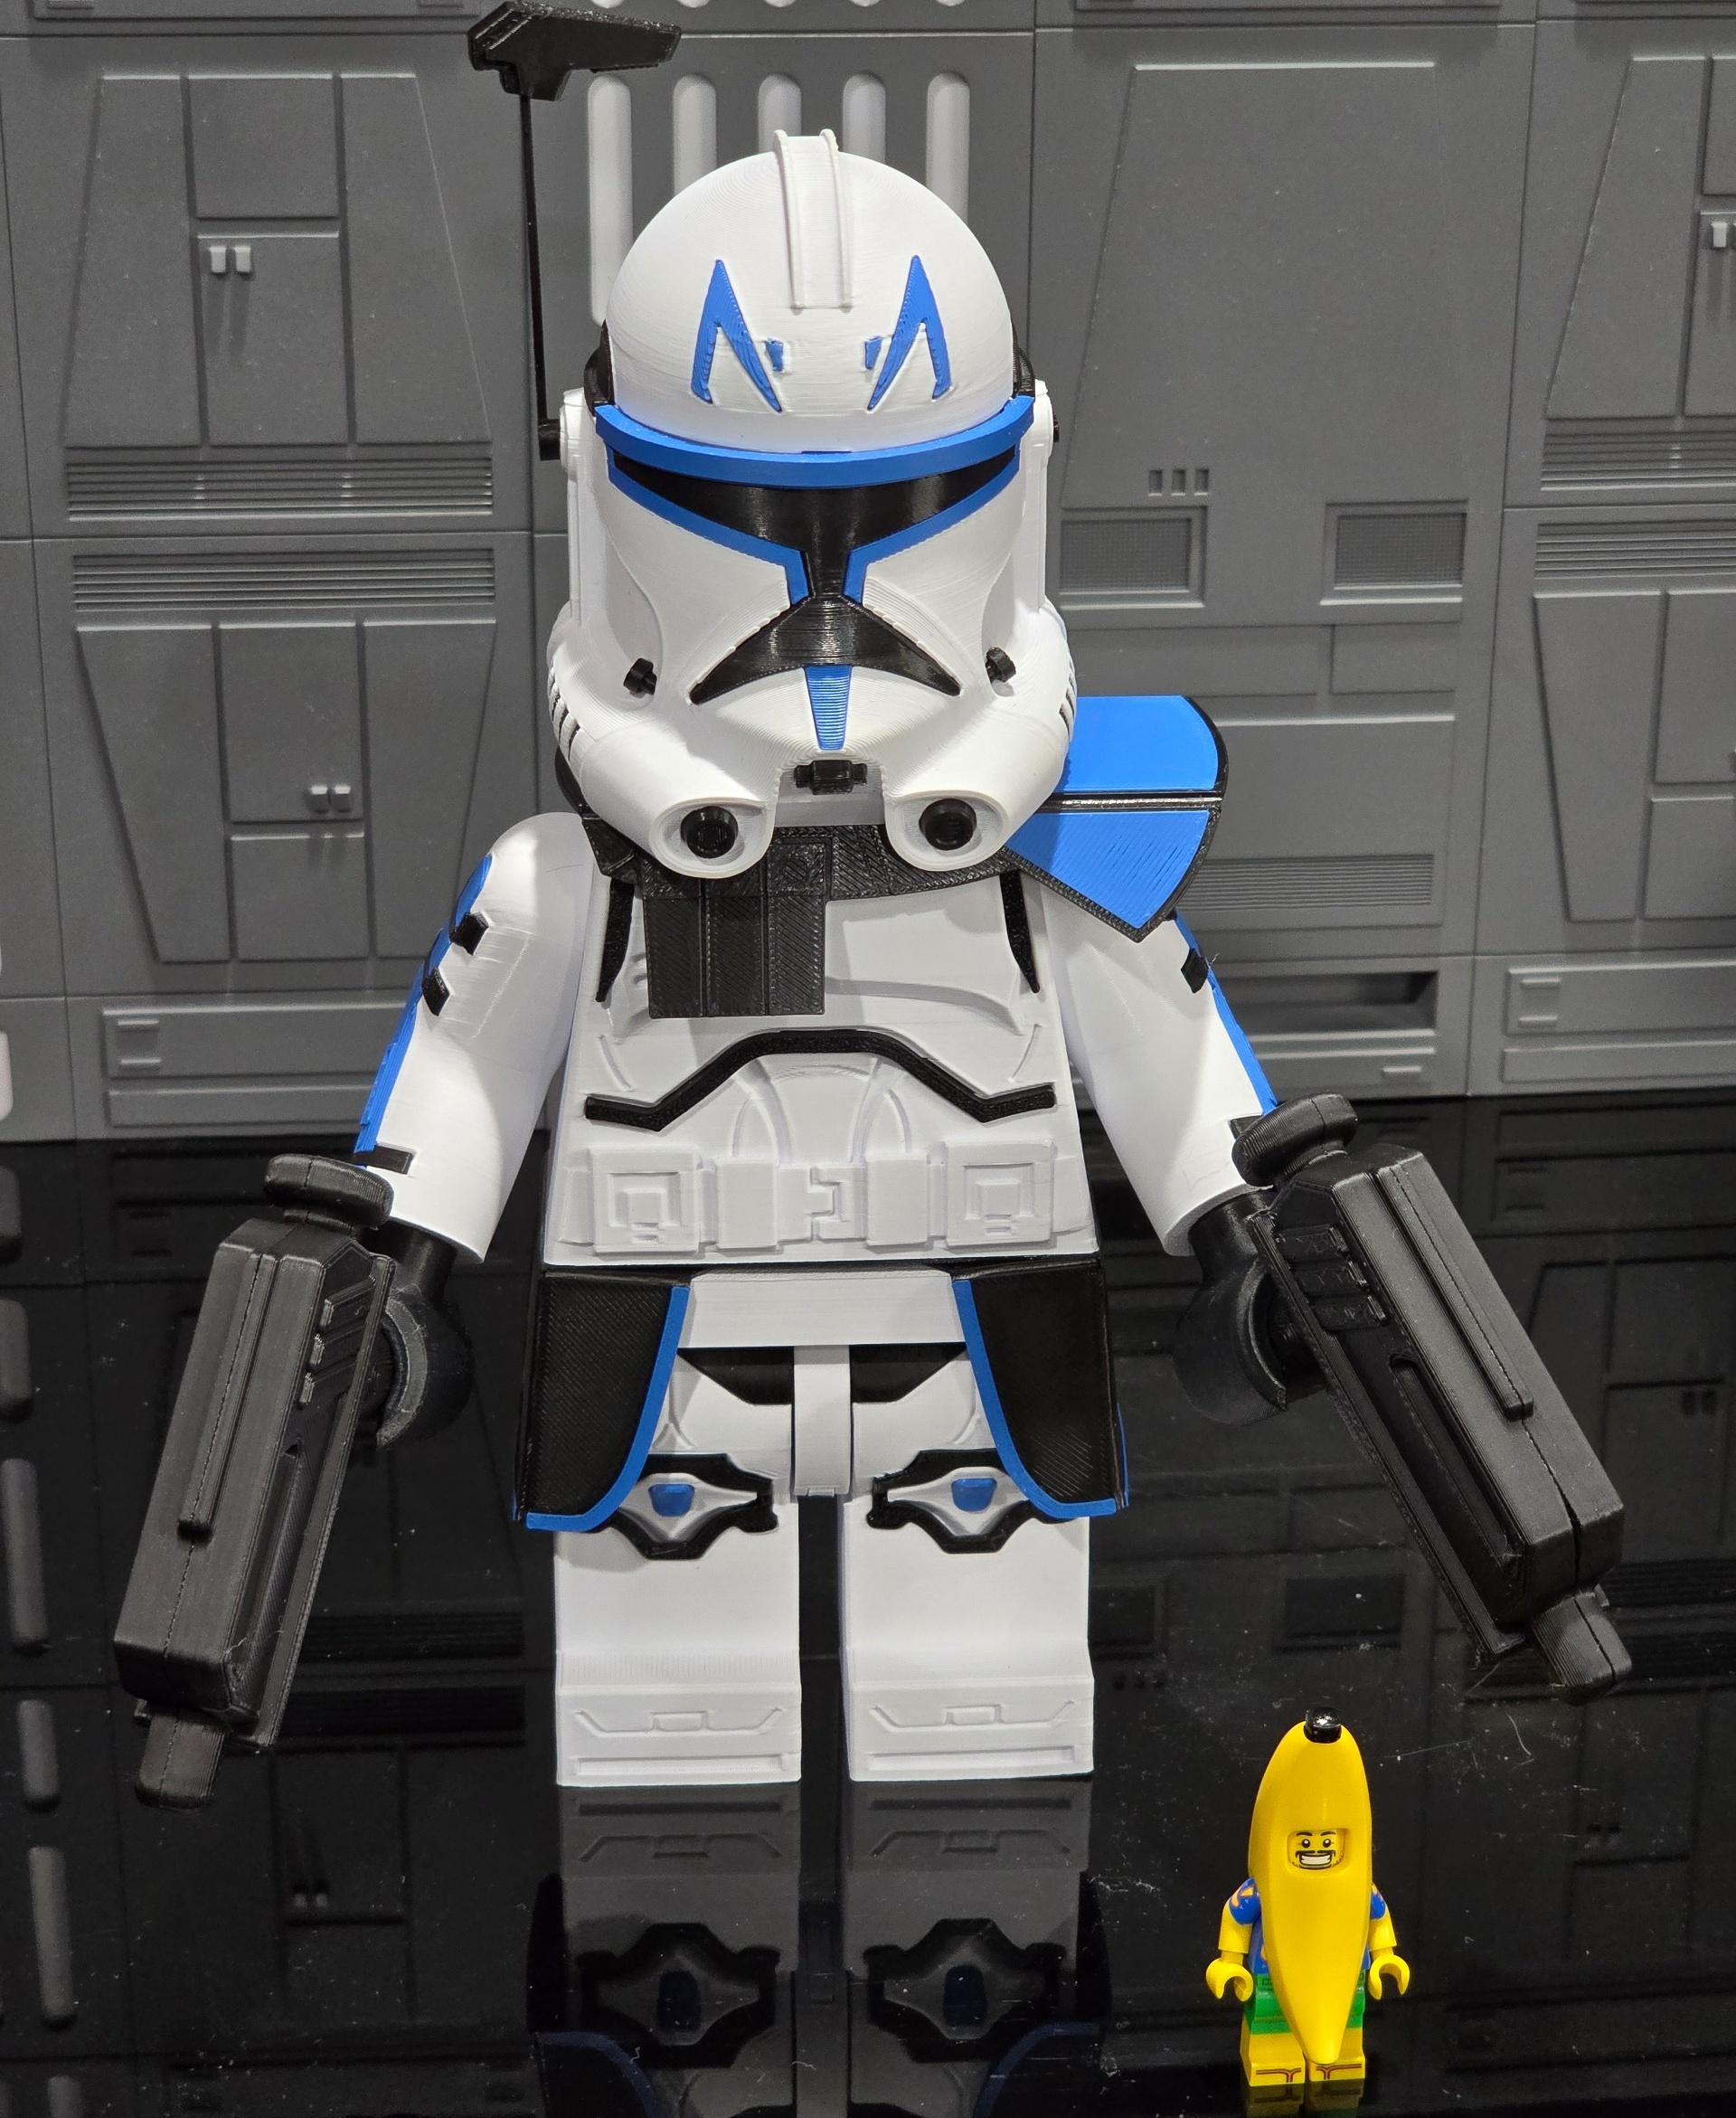 Captain Rex (6:1 LEGO - "Yes, I know both Crunch and Kirk. All the captains know each other, but not all are Star Wars LEGO captains. Banana for scale." - 3d model